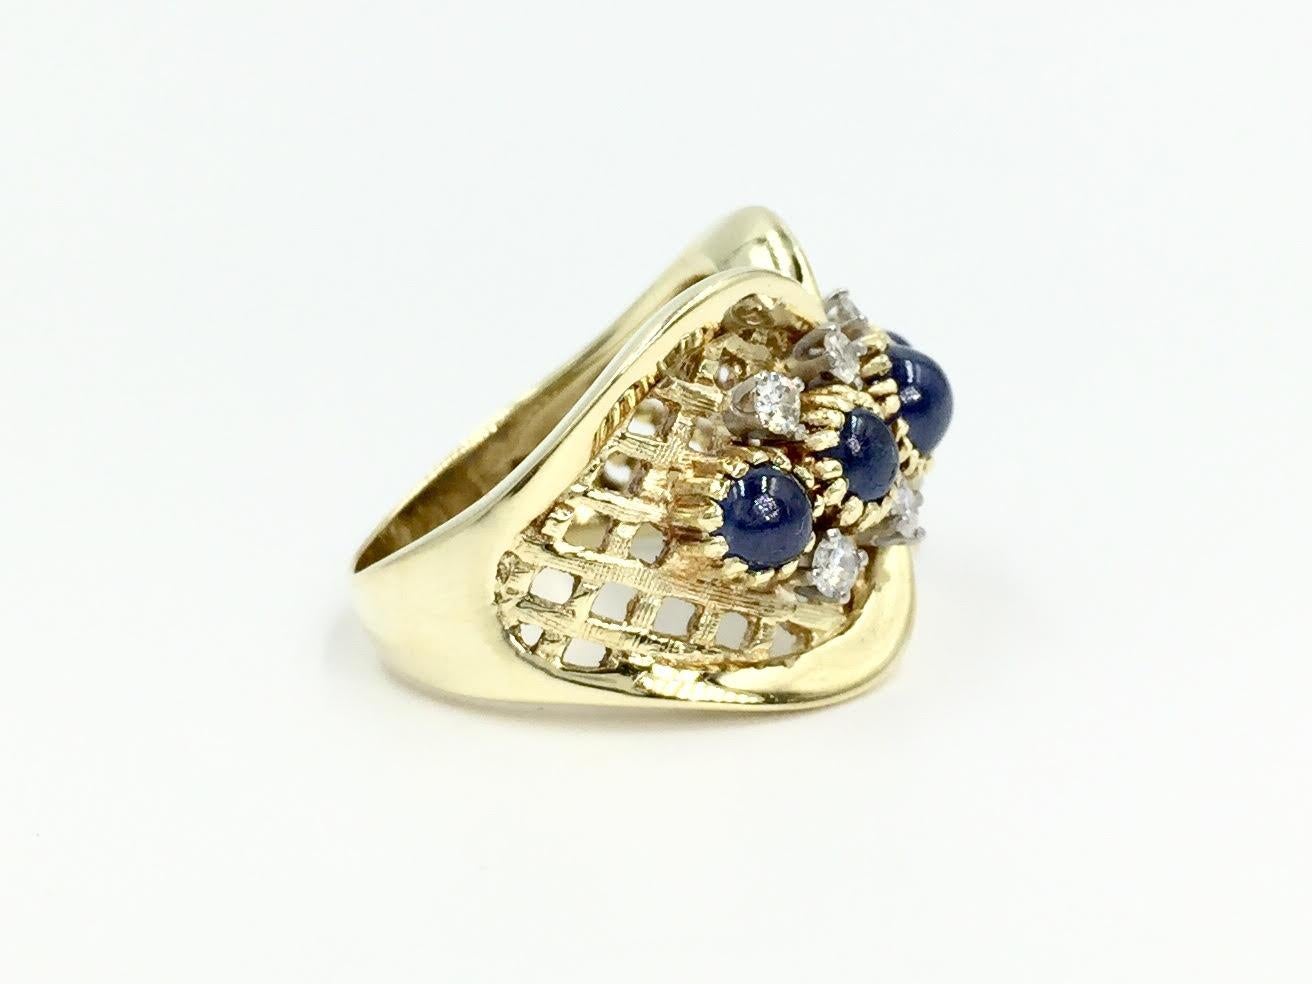 Circa 1965. This uniquely designed 14k yellow gold wide ring features 5 cabochon blue sapphires and 8 round diamonds at approximately .16 carats total weight. Diamonds are approximately G color, SI1 clarity. Beautiful open lattice detail is hand